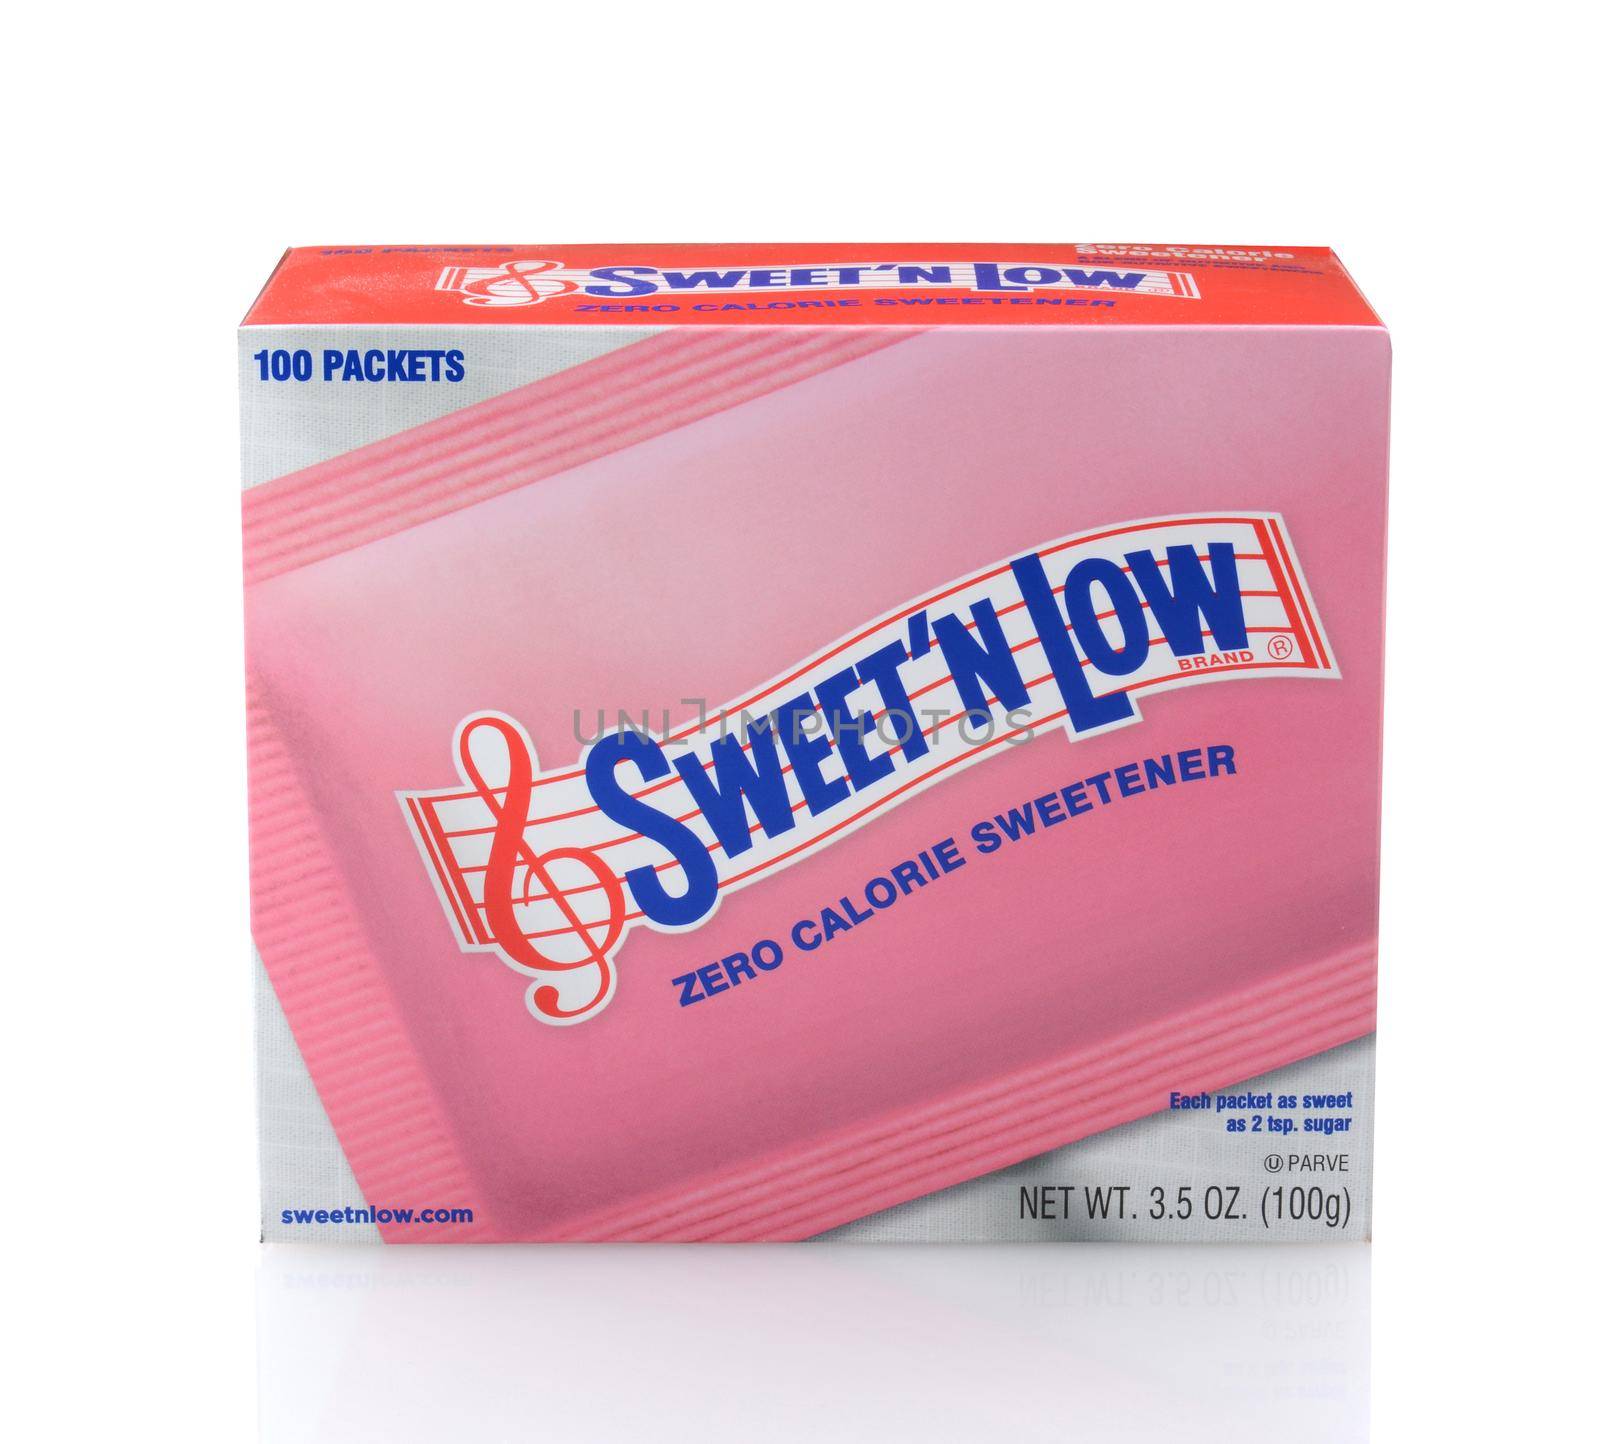 IRVINE, CA - DECEMBER 29, 2014: A box of Sweet 'N Low. The popular artificial sweetener is made from granulated saccharin with dextrose and crem of tartar.